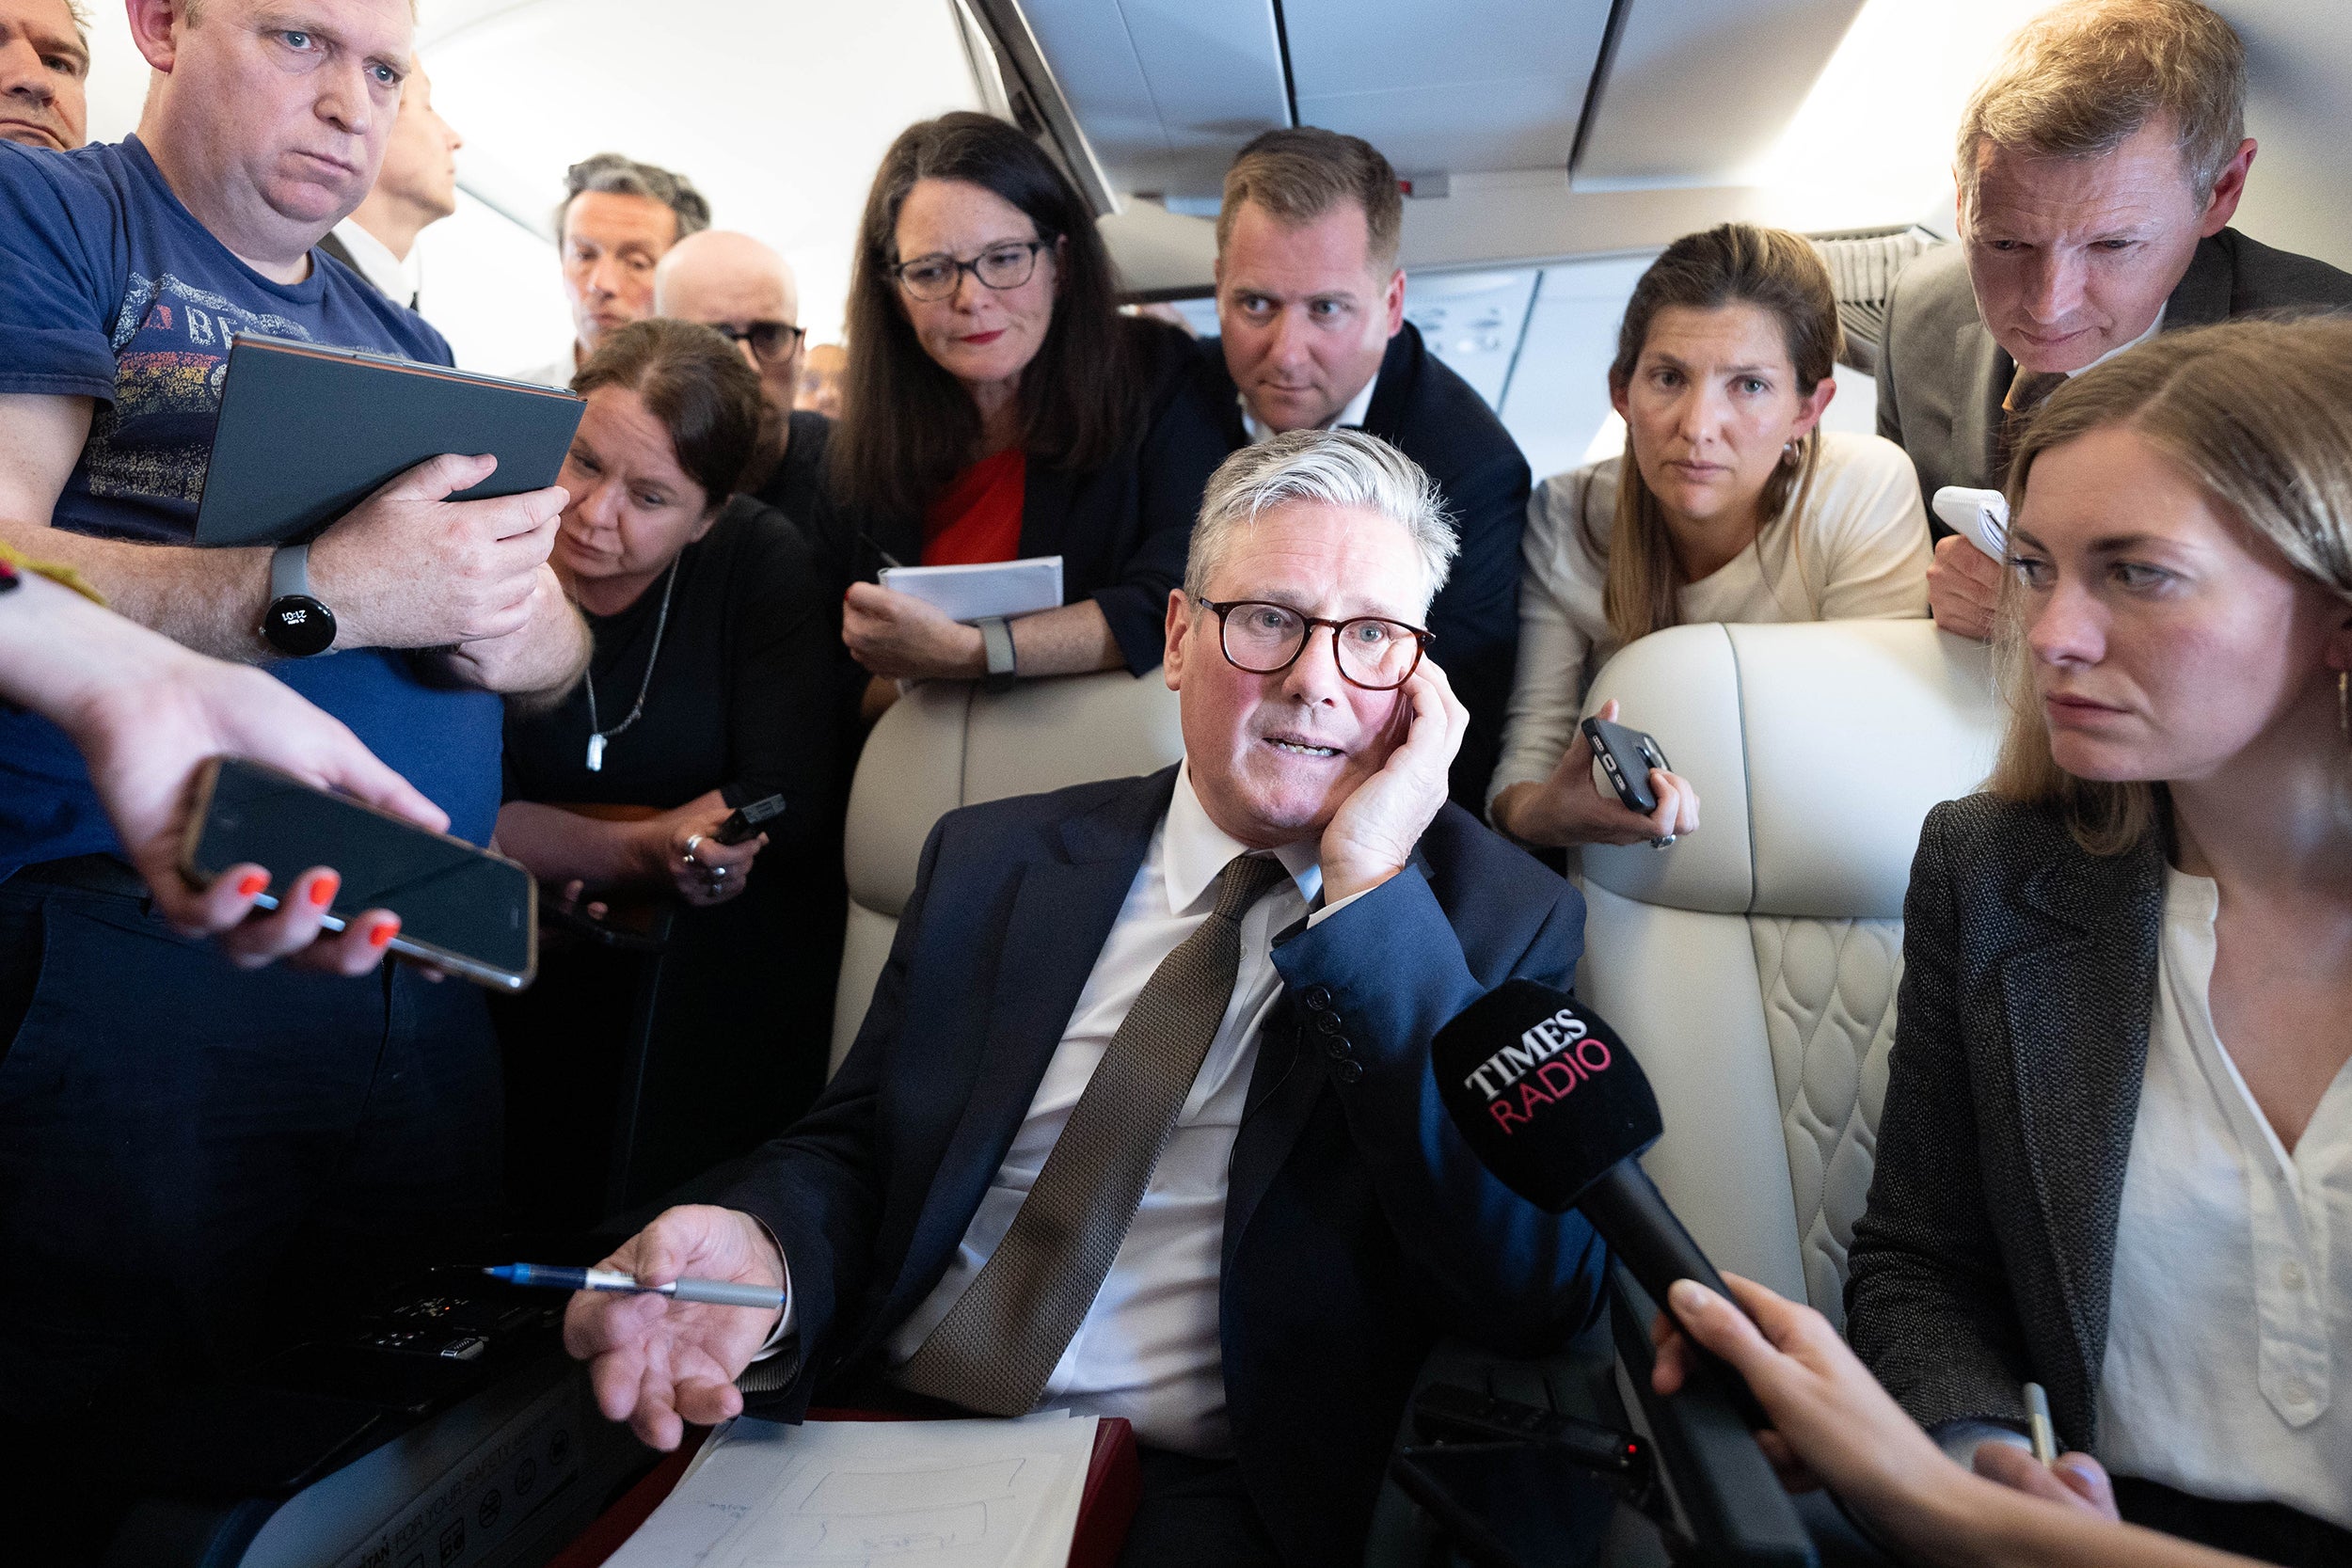 Sir Keir Starmer talks to journalists as he travels on board a plane to Washington